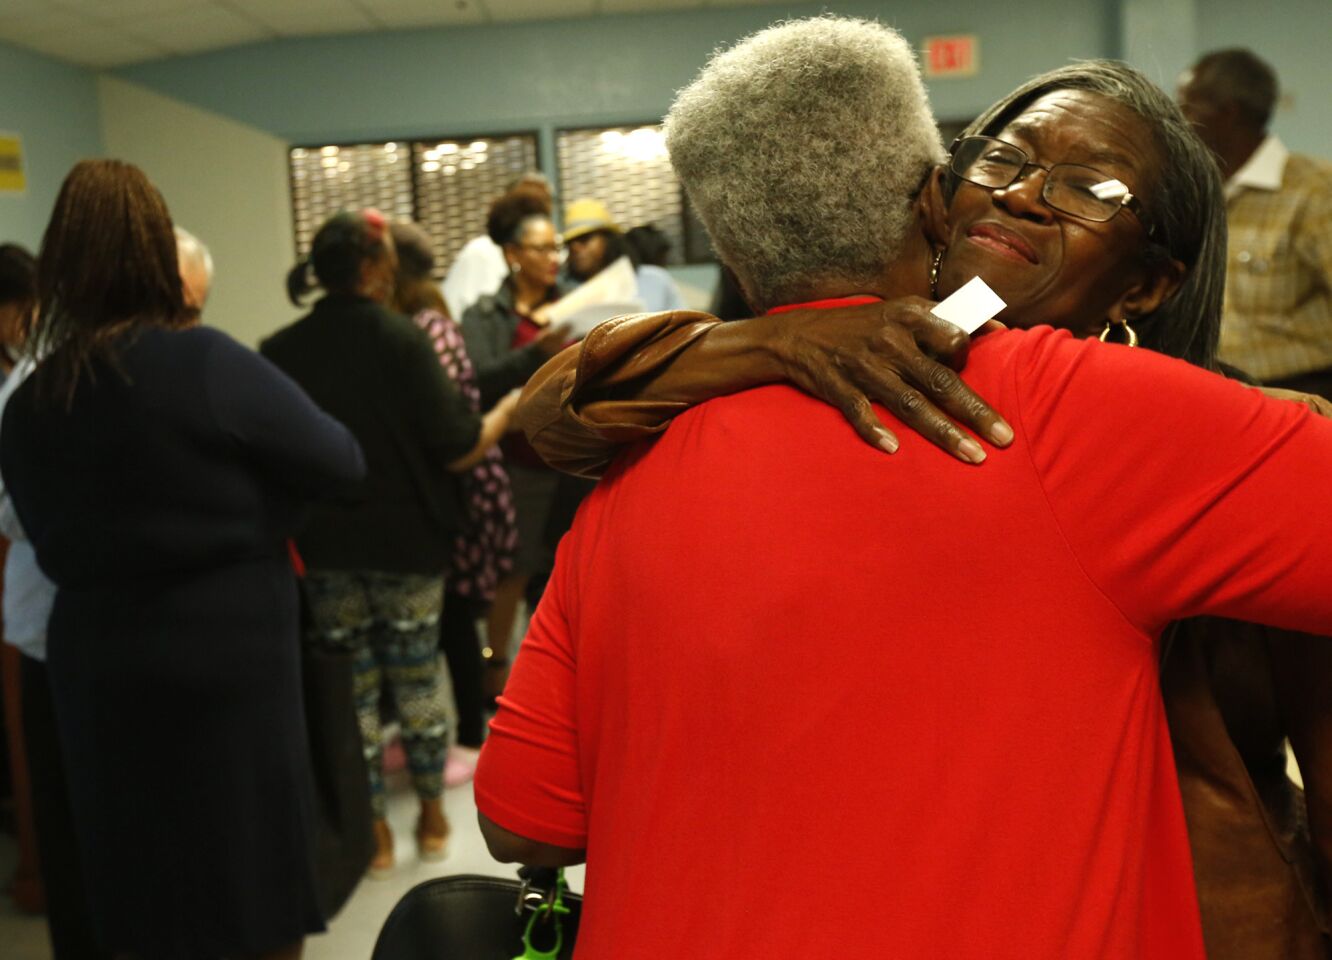 Compton City Council member Emma Sharif, right, hugs Earlene Diggs, 80, at the end of a rally to "Stop the Violence" in Compton. Diggs' son and grandson were killed in gang-related shootings in the city.